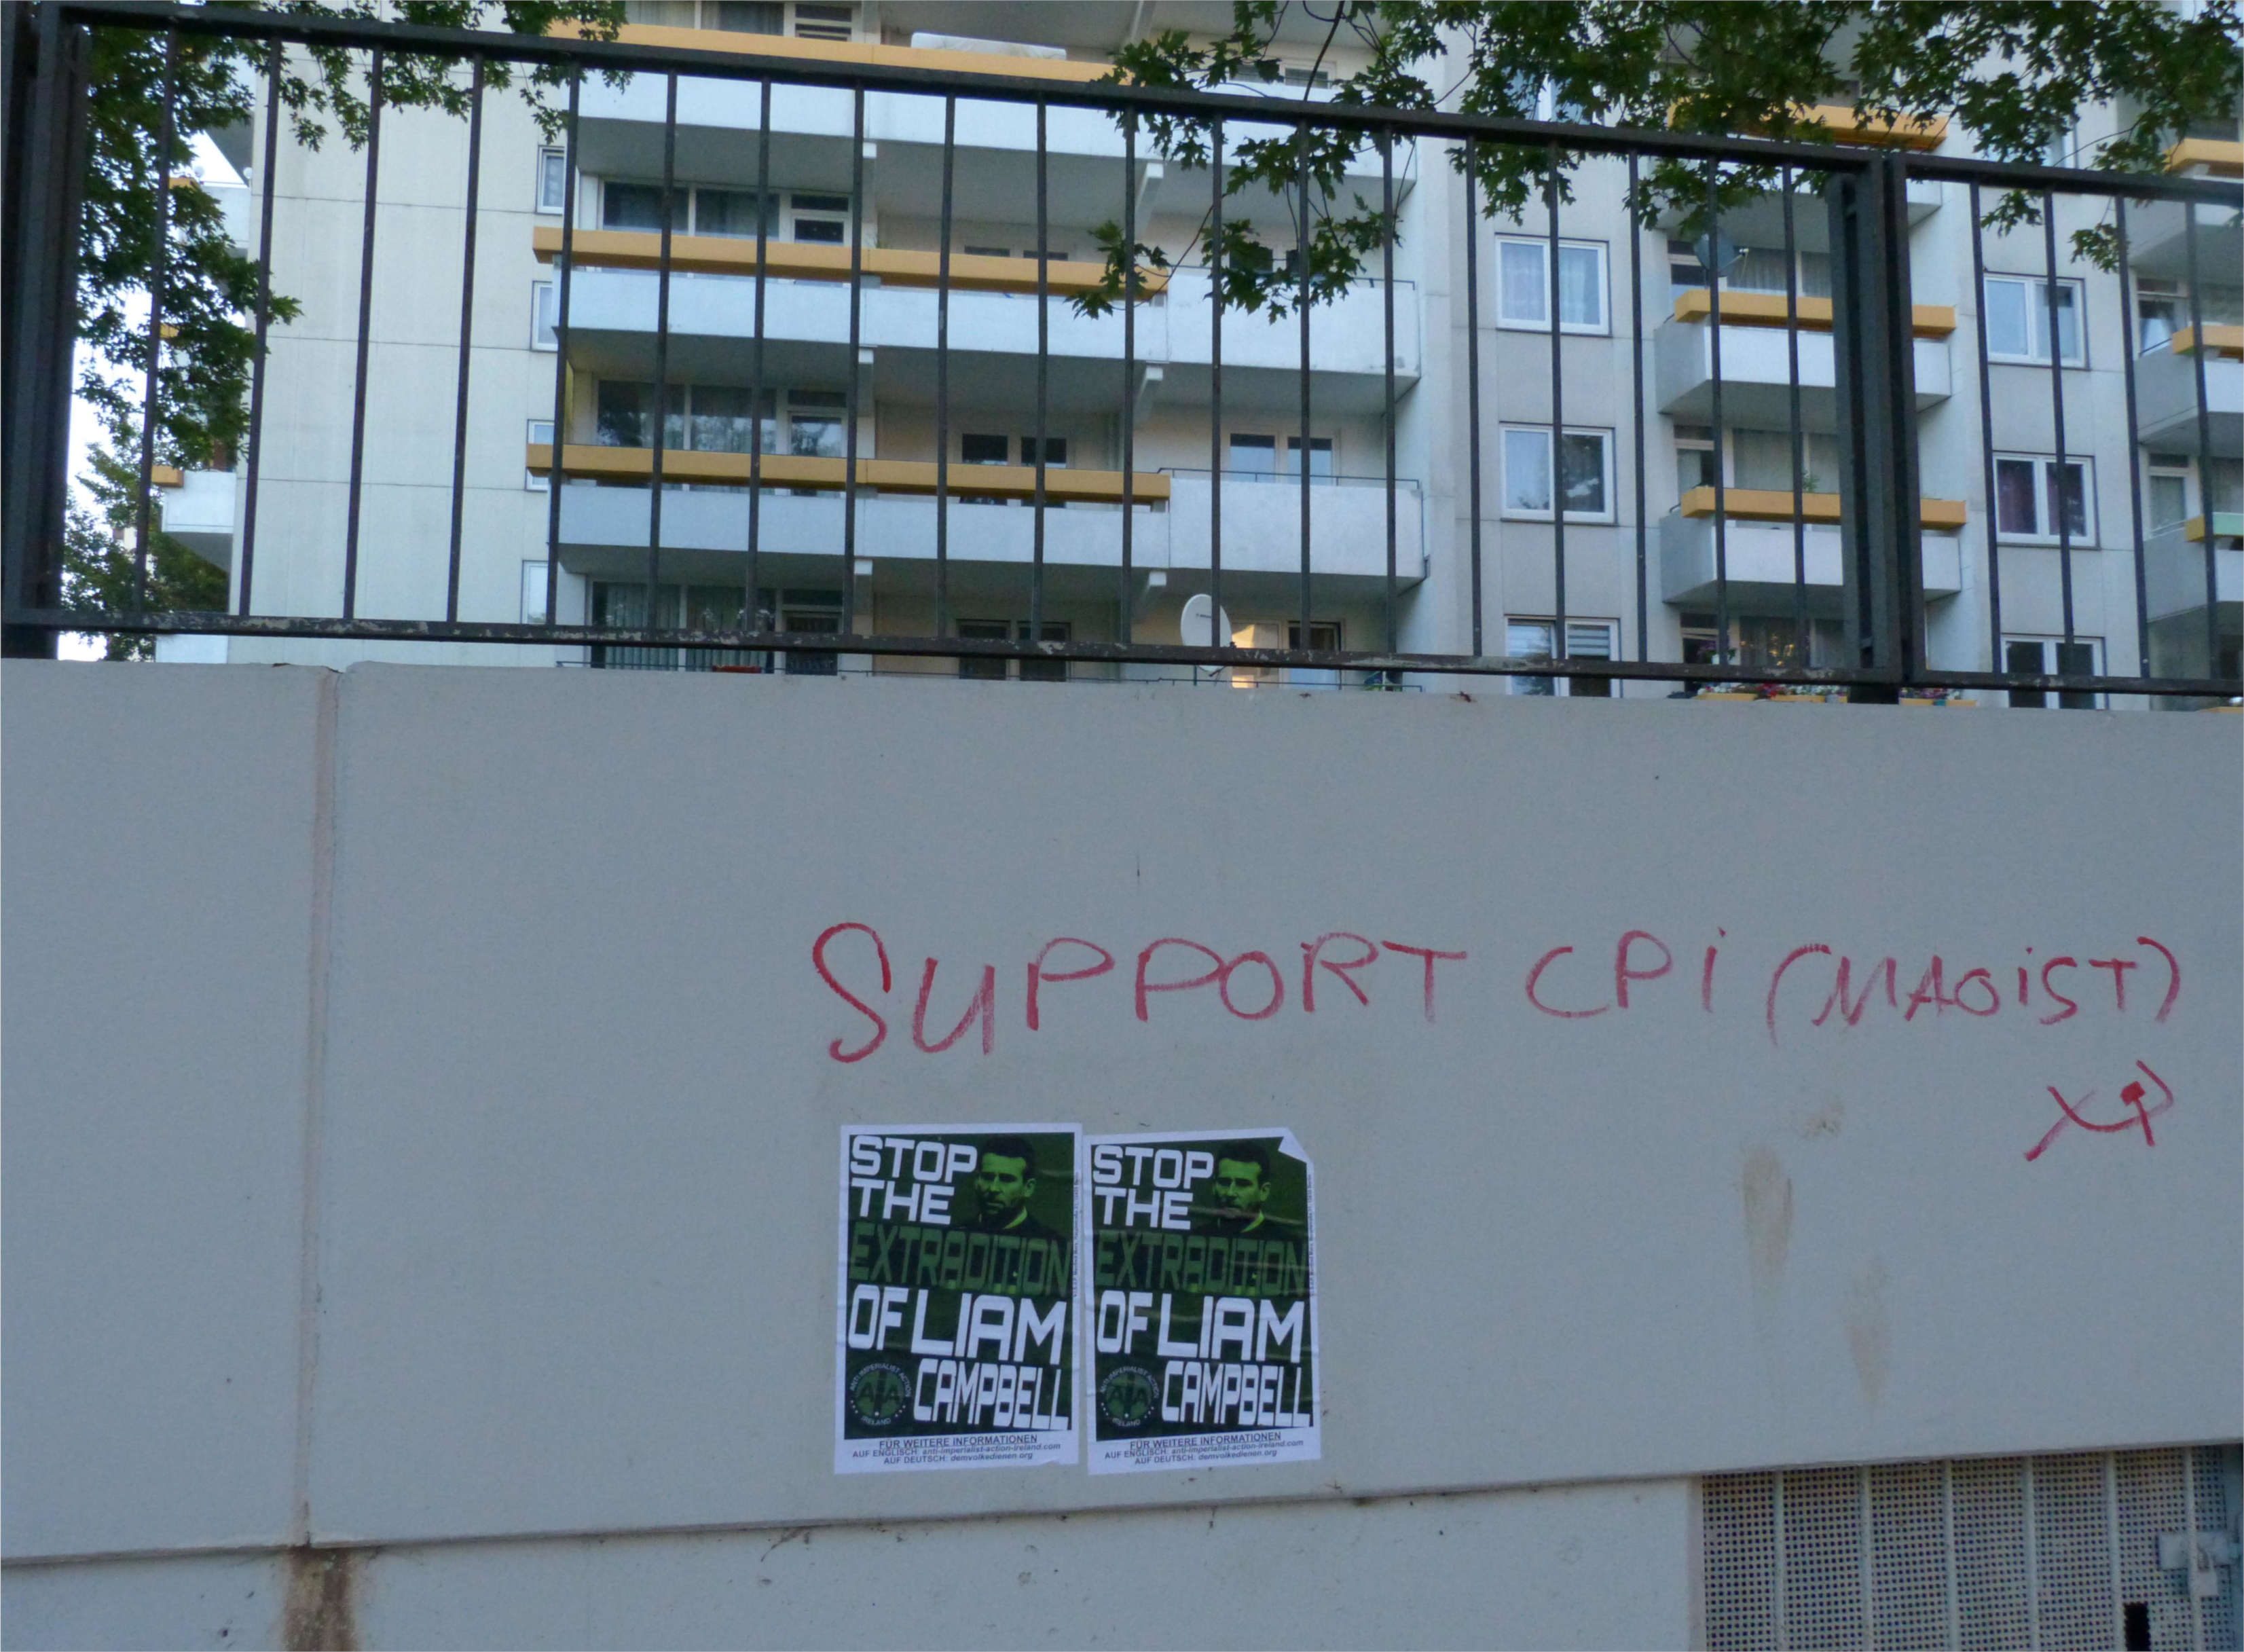 International Solidarity Posters Against The Extradition Of Liam Campbell In Bremen